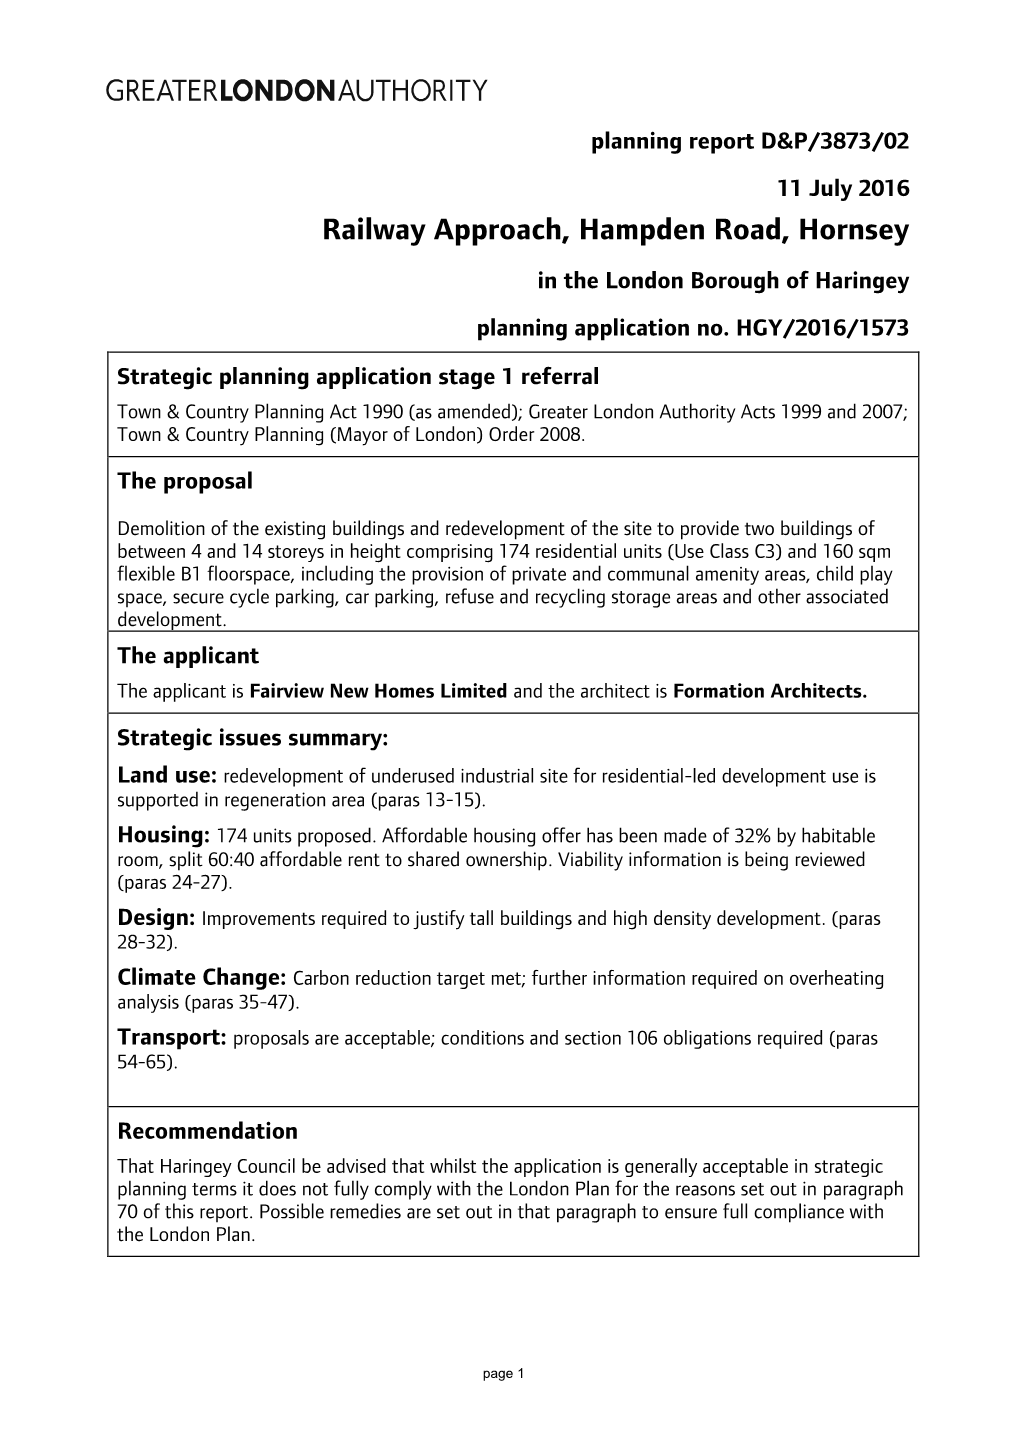 Railway Approach, Hampden Road, Hornsey in the London Borough of Haringey Planning Application No